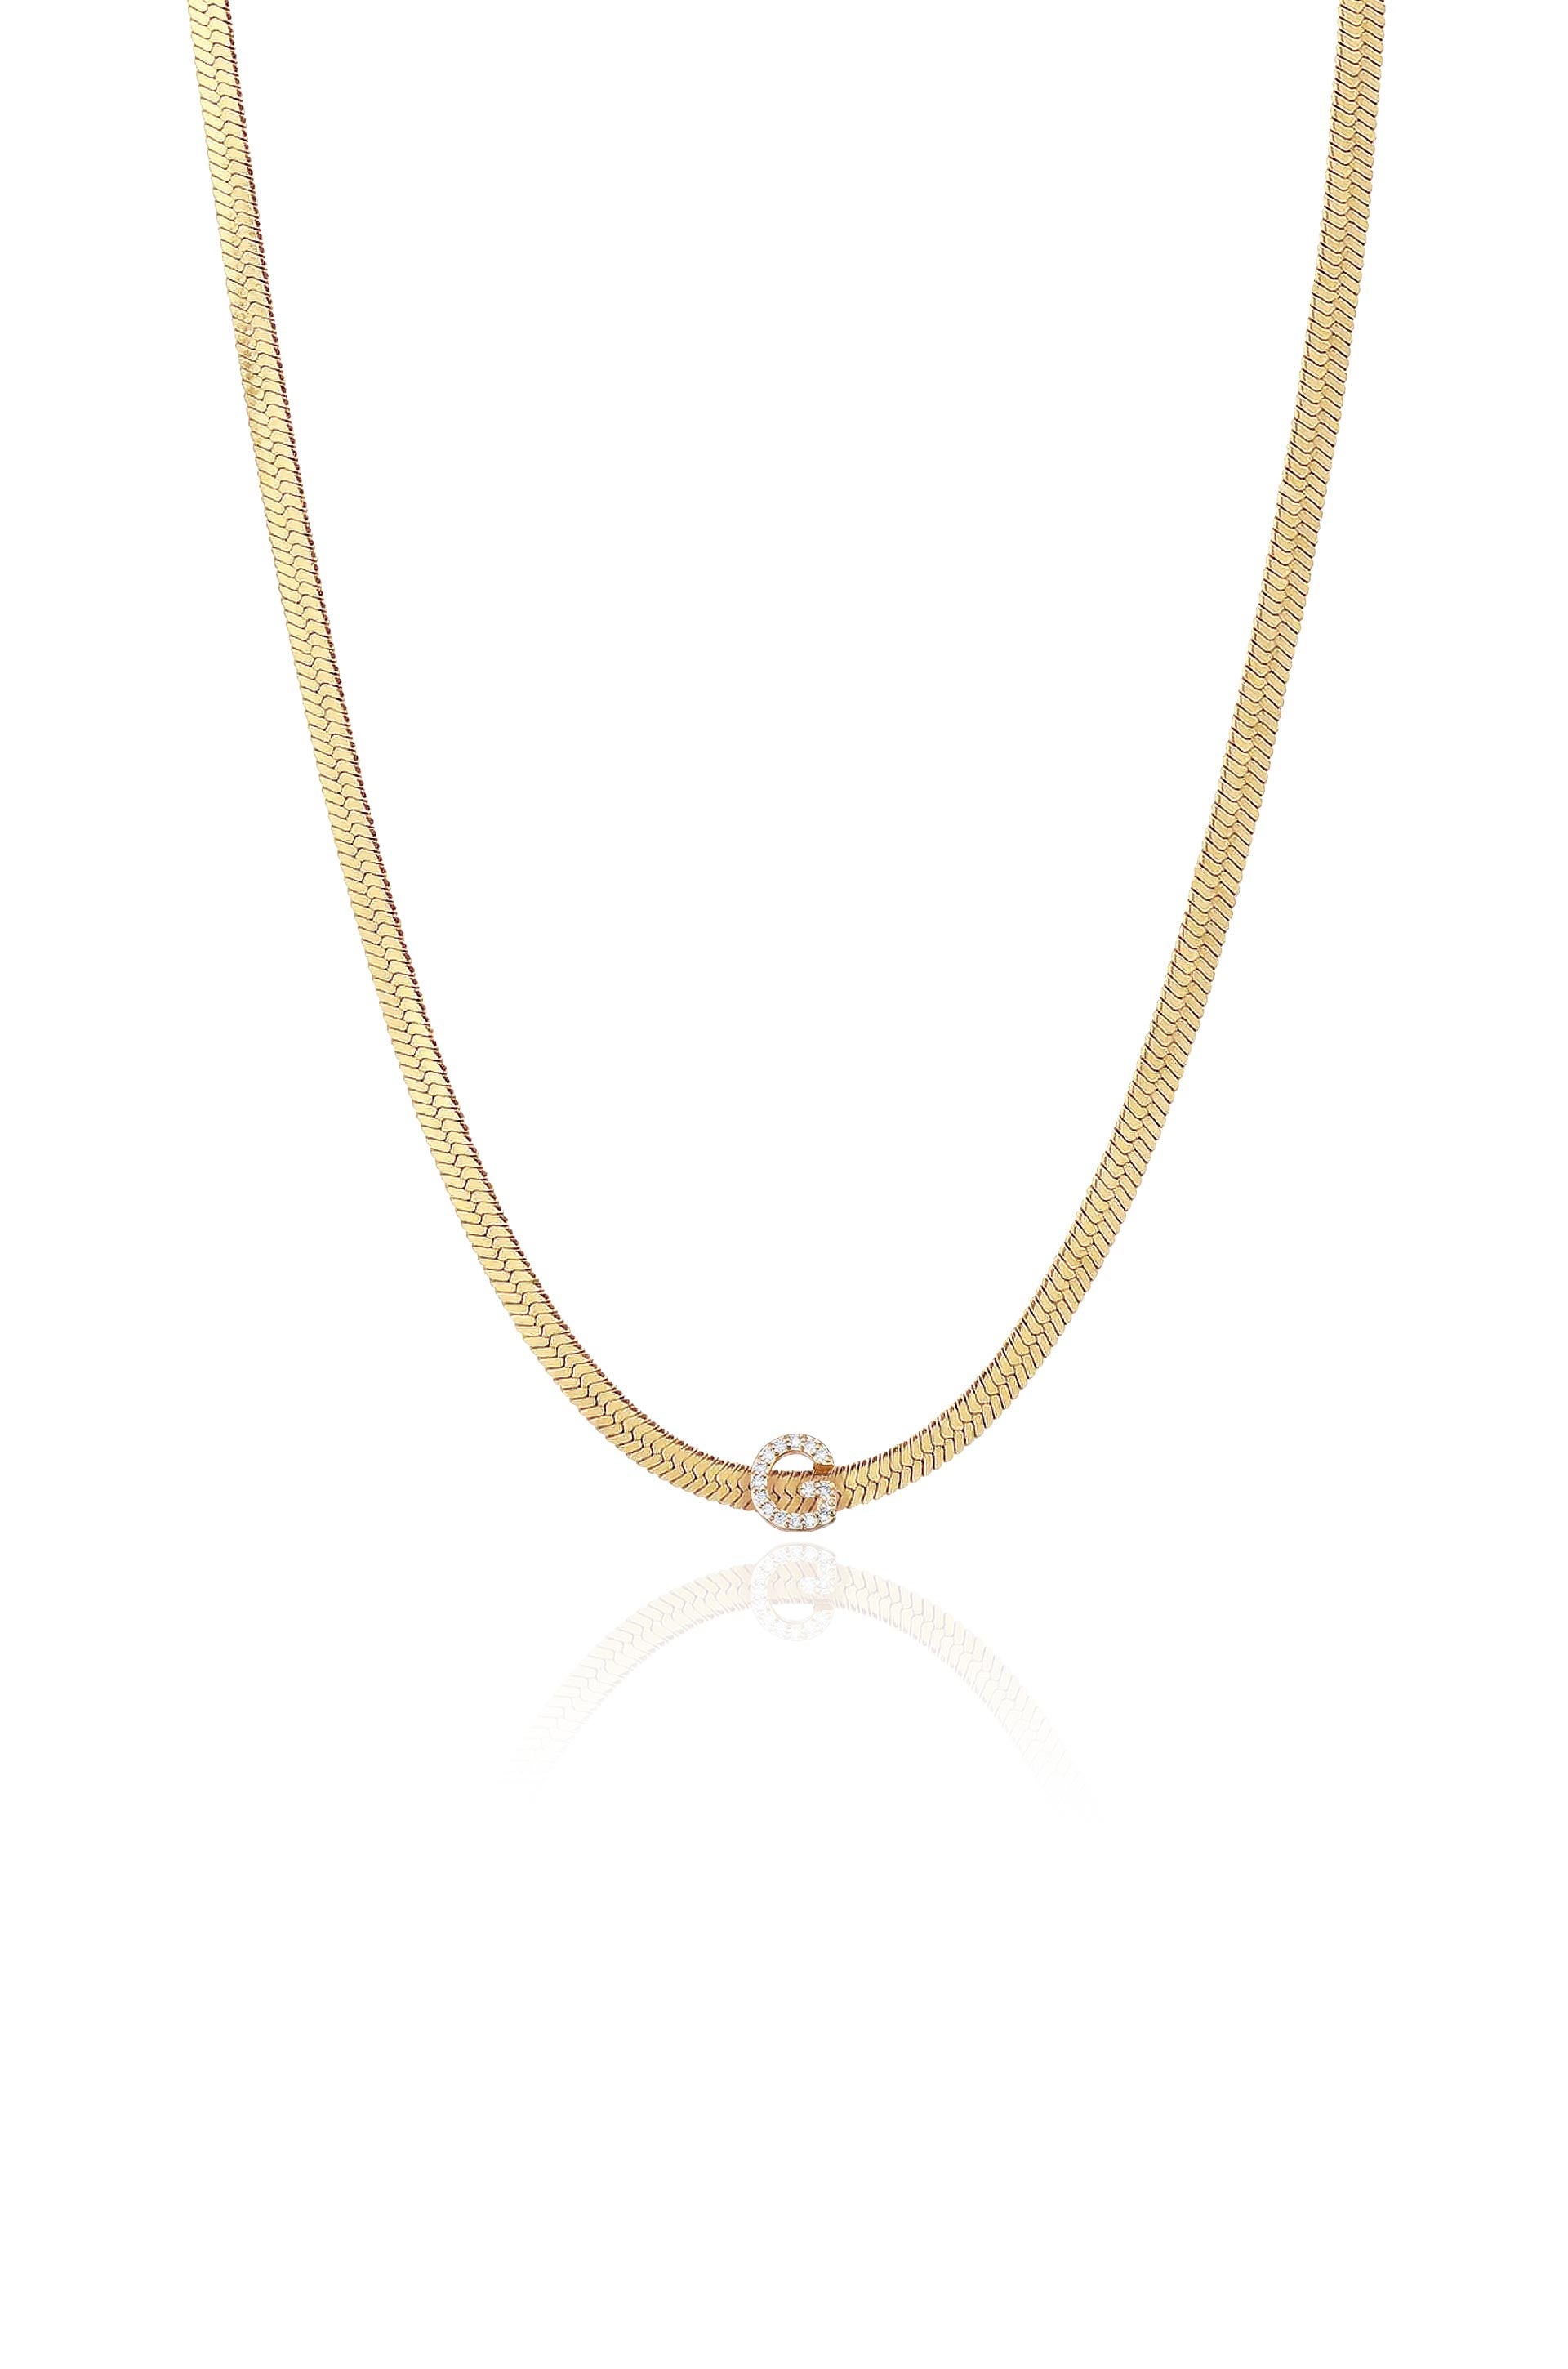 IBB 18ct Gold Forzatina Chain Necklace, Gold at John Lewis & Partners